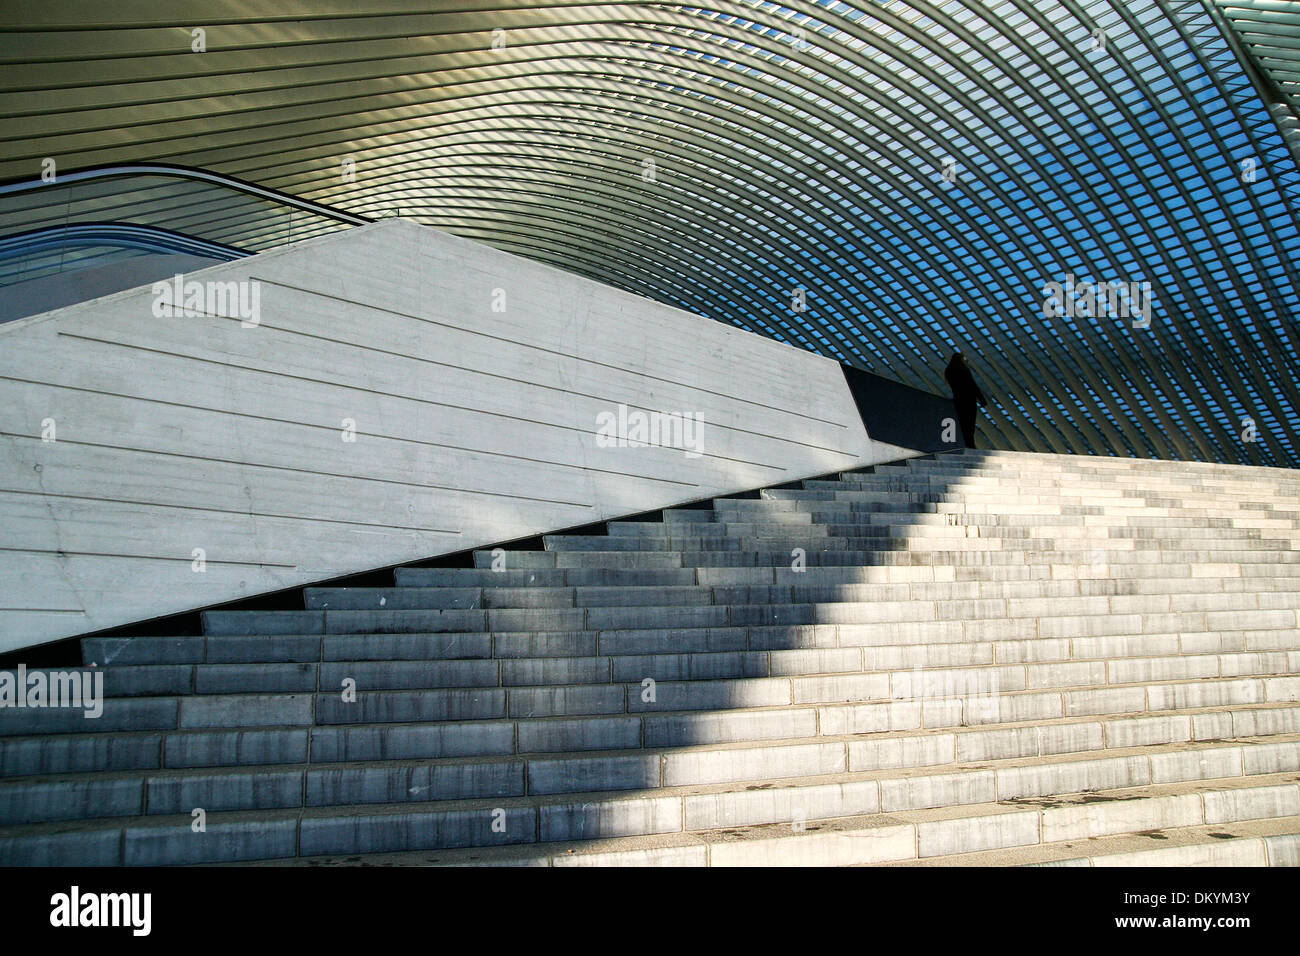 Stairs and roof of a railway station in Liege, Belgium, with a woman standing on platform. Stock Photo